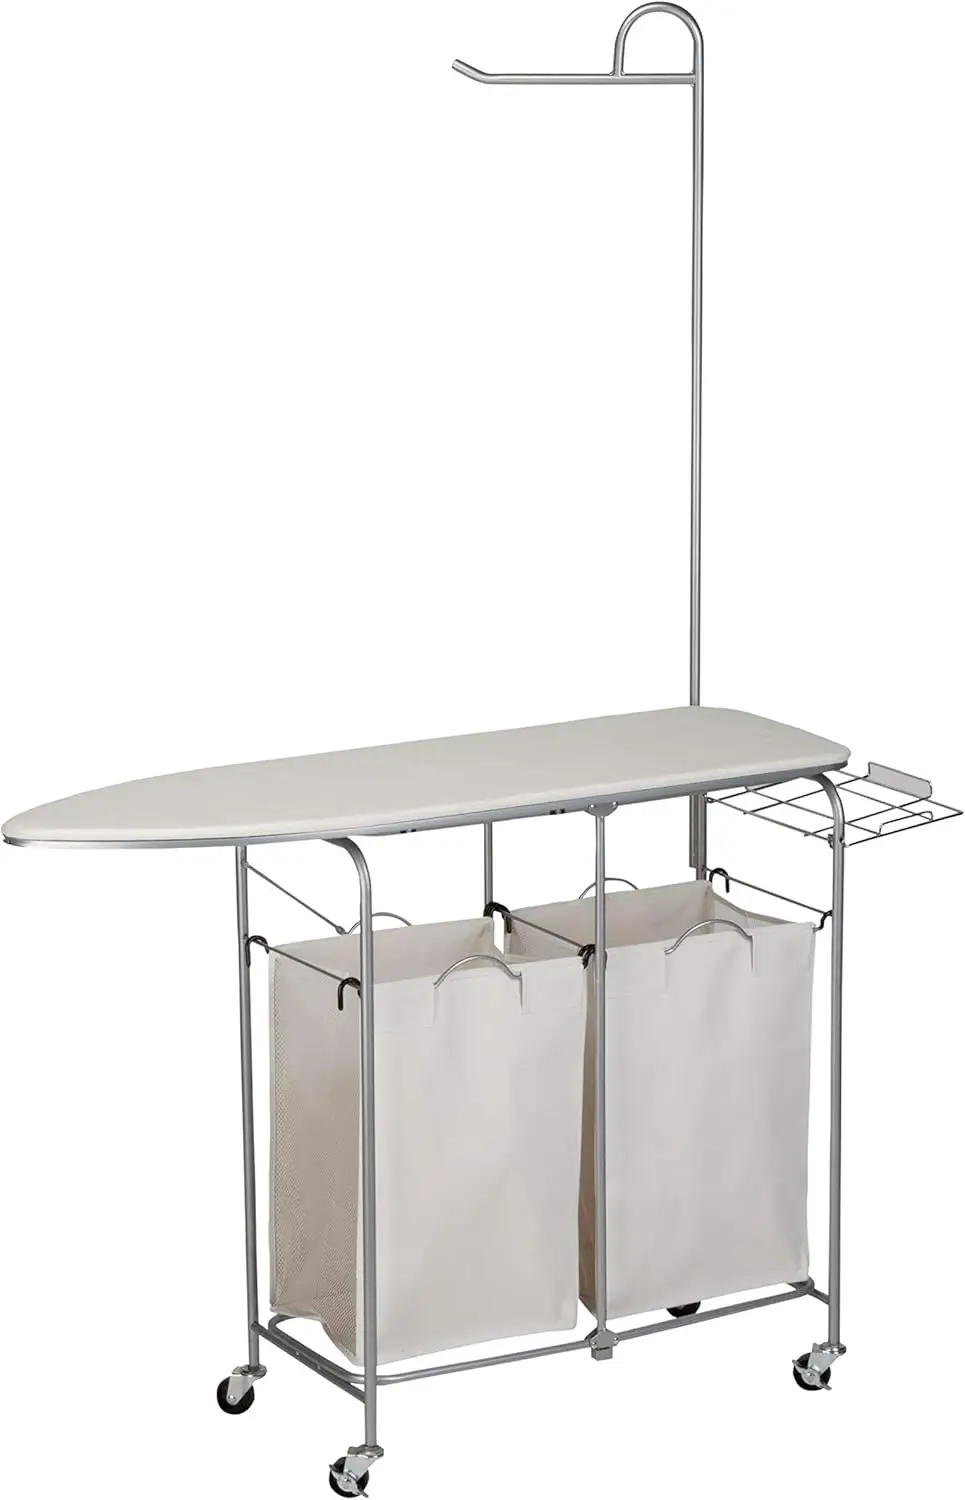 

Rolling Laundry Sorter with Ironing Board and Shirt Hanger